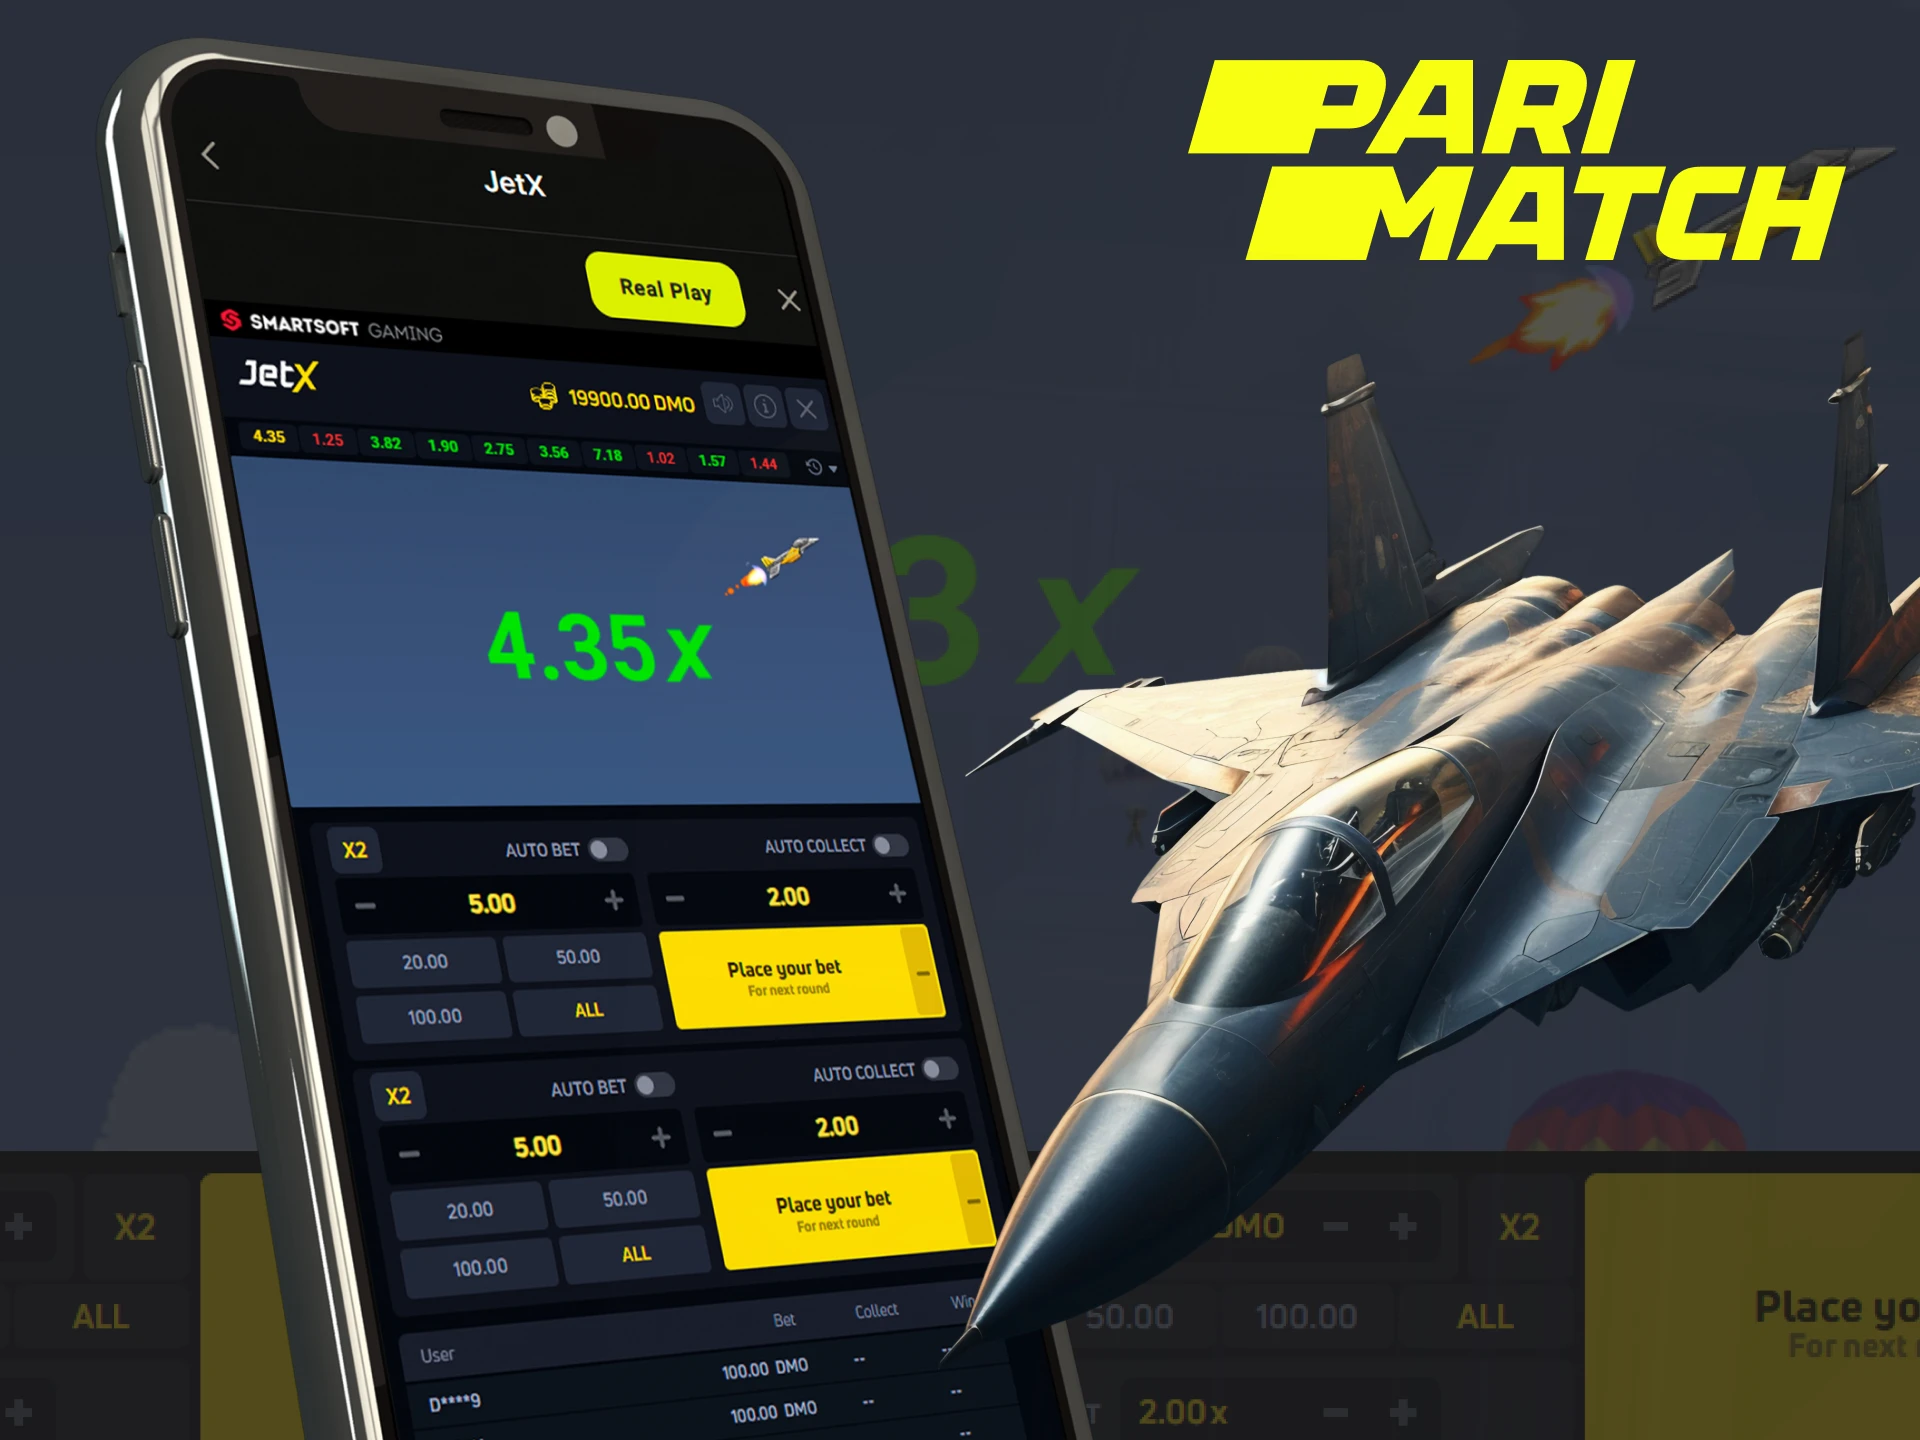 If you like instant crash games, try JetX on the Parimatch app.